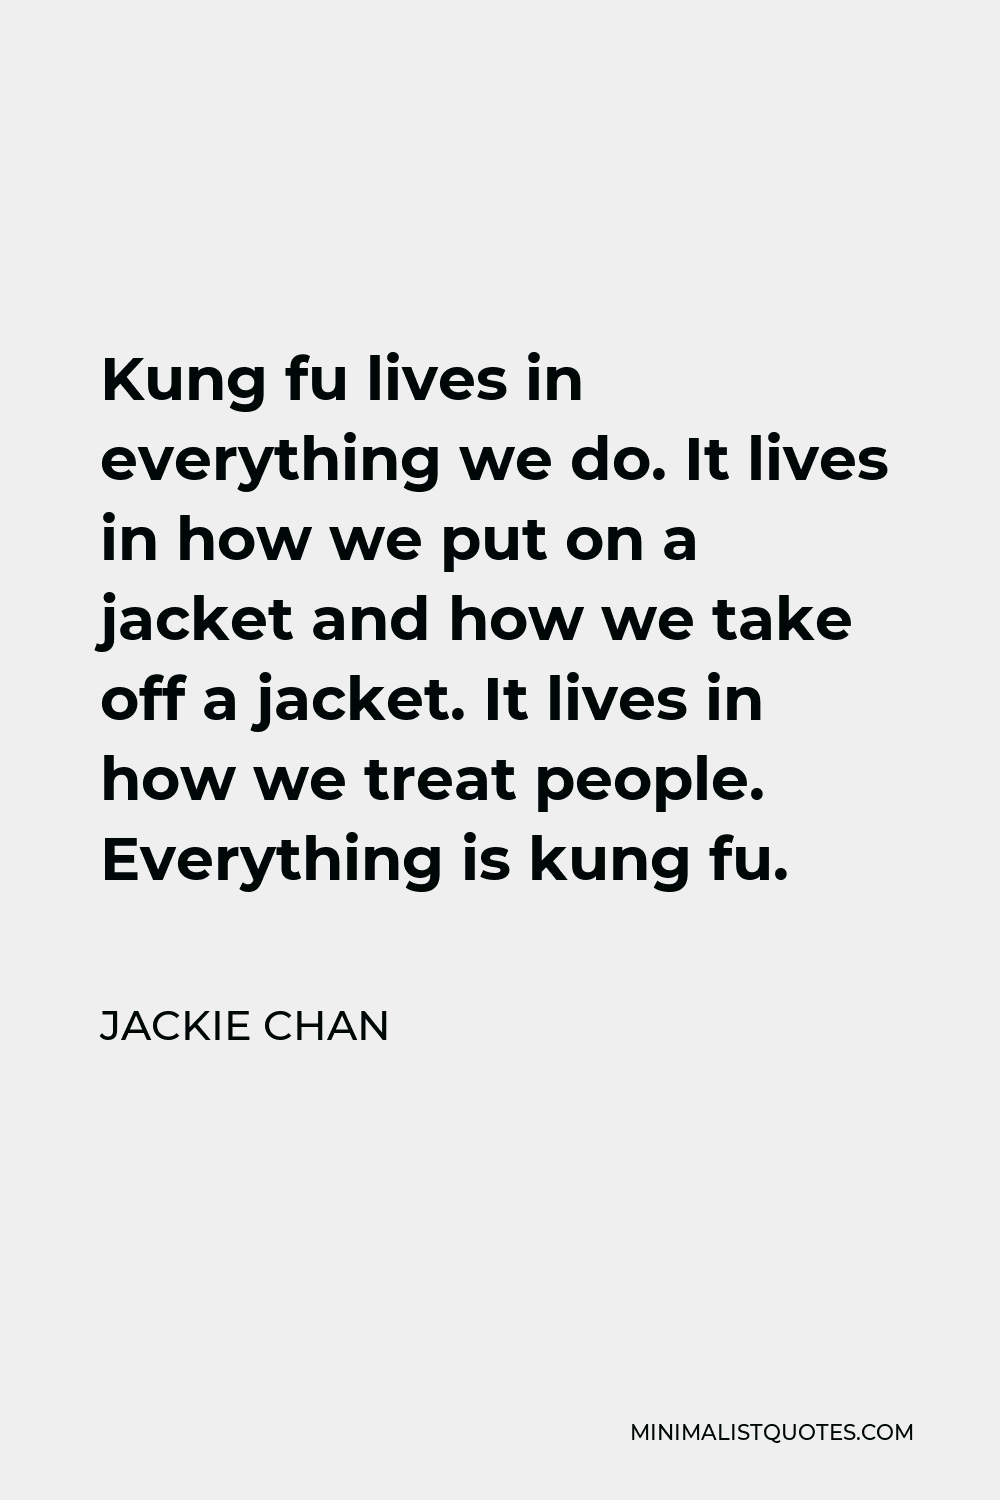 Jackie Chan Quote - Kung fu lives in everything we do. It lives in how we put on a jacket and how we take off a jacket. It lives in how we treat people. Everything is kung fu.